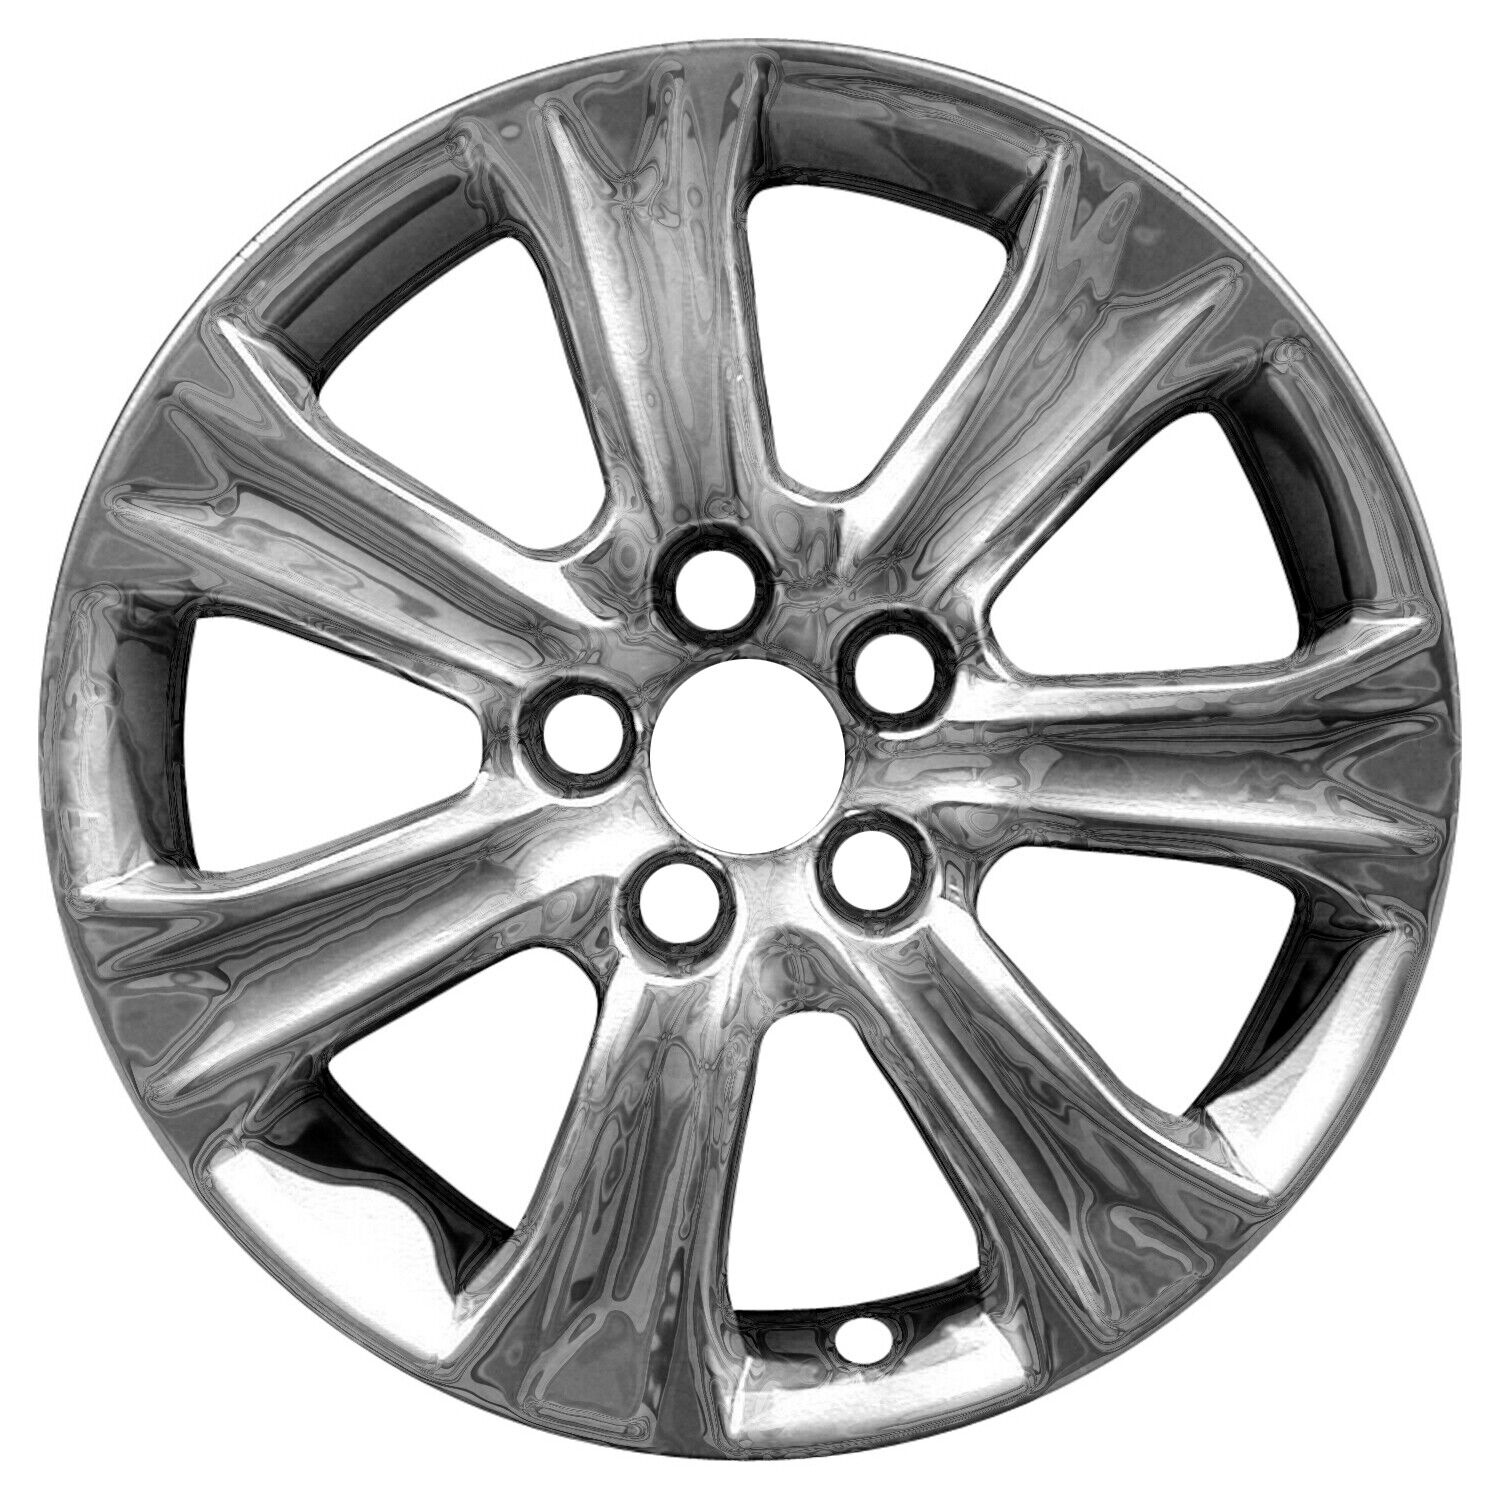 Refurbished 18x8 Painted Silver Wheel fits 2009-2011 Acura RL 560-71783